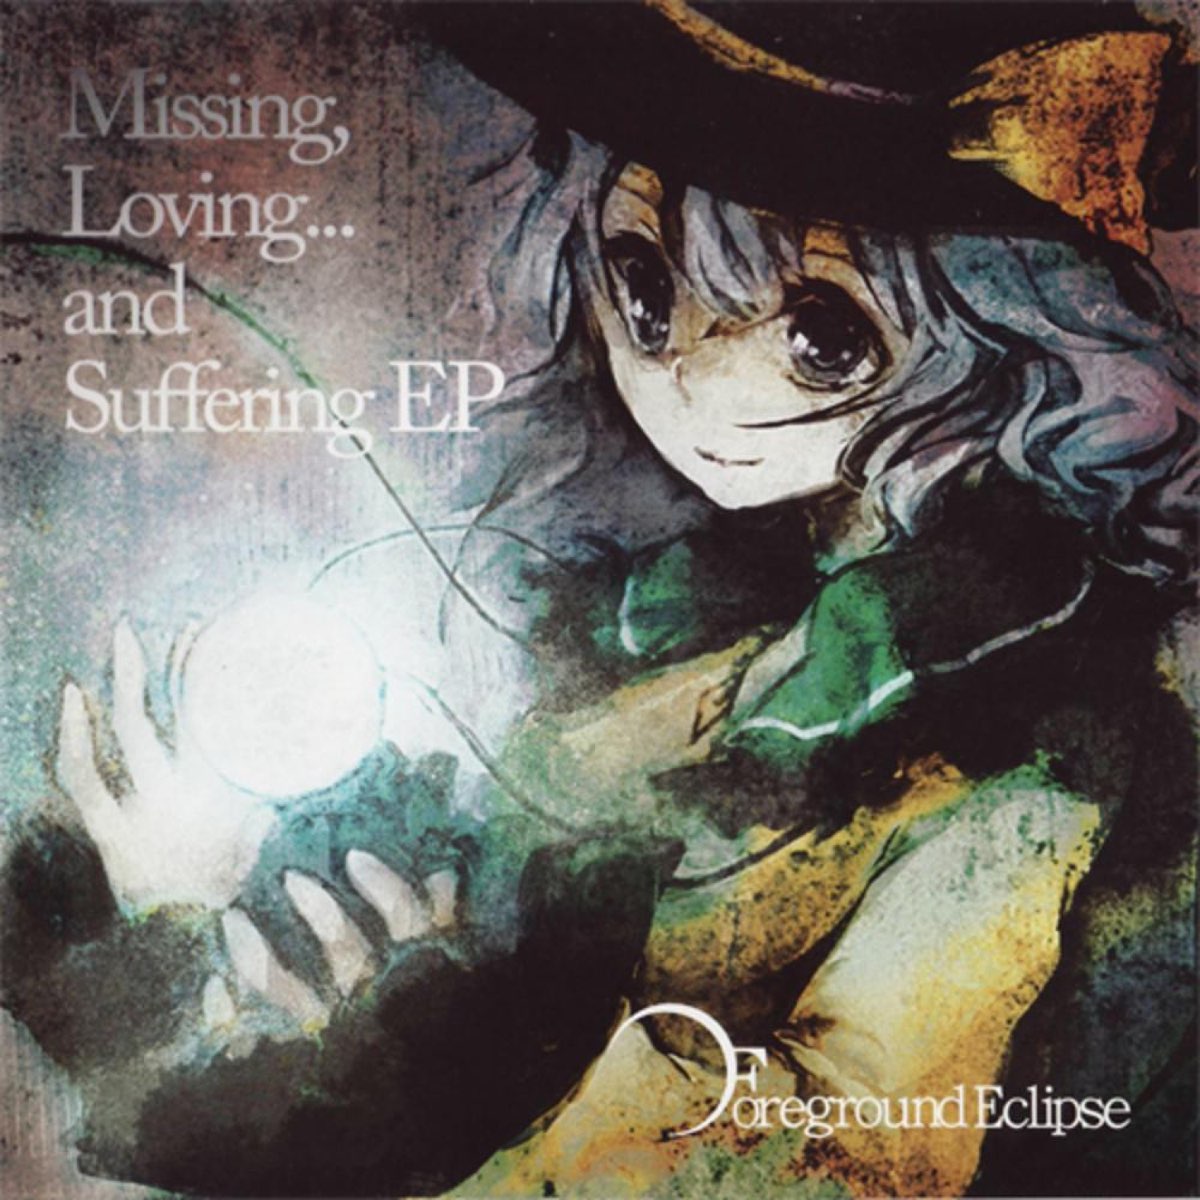 Missing, Loving...and Suffering EP